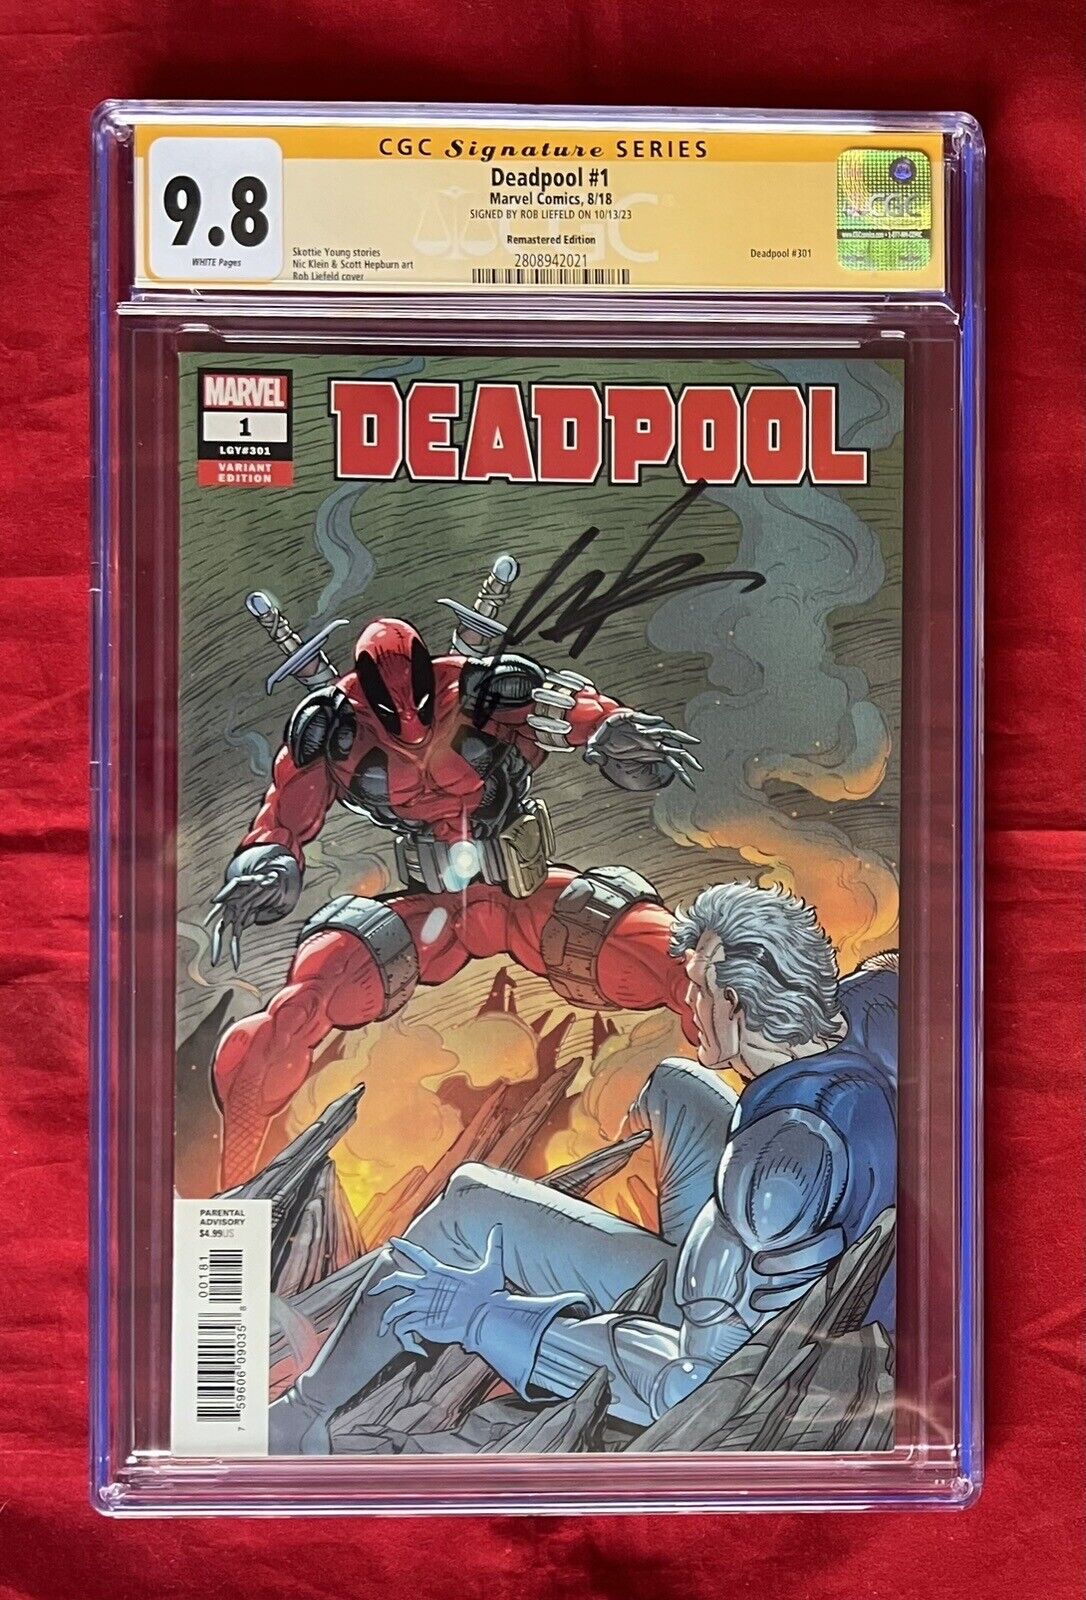 Deadpool #1 Rob Liefeld Remastered Edition CGC SS 9.8 Signed by Rob Liefeld